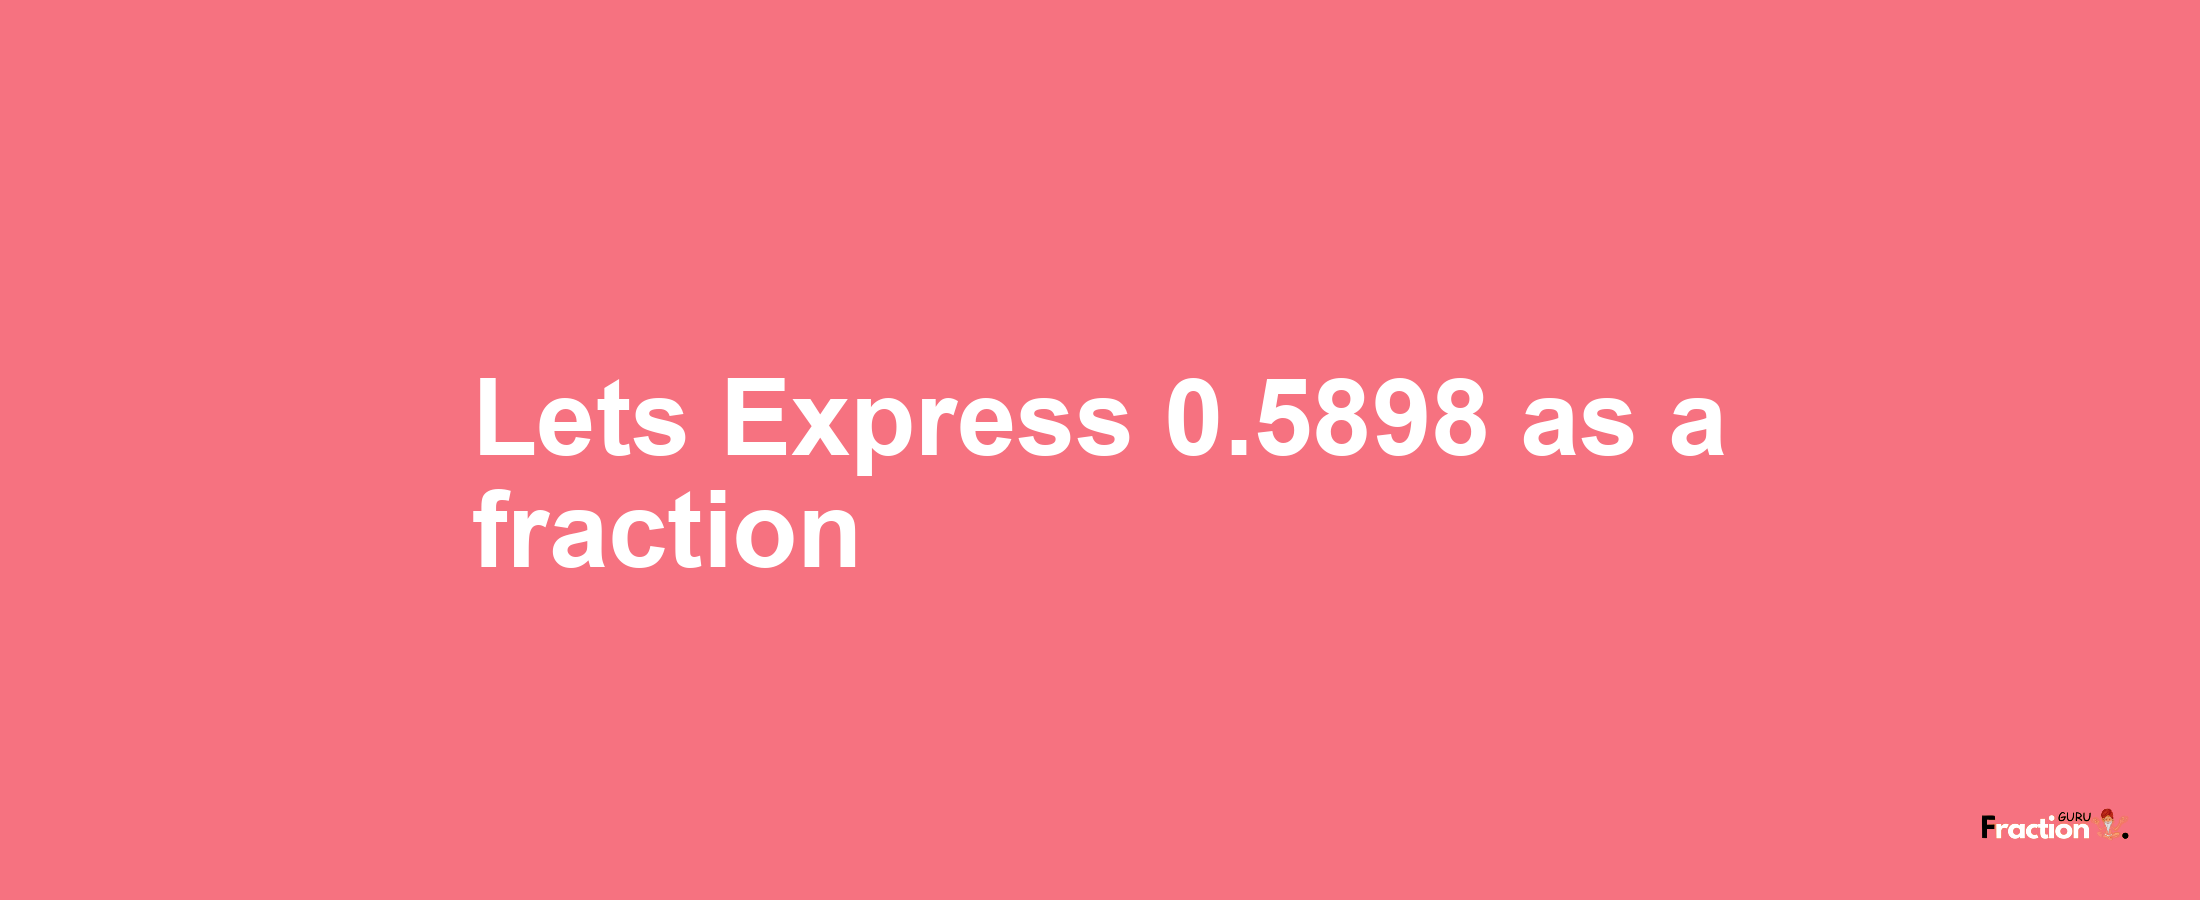 Lets Express 0.5898 as afraction